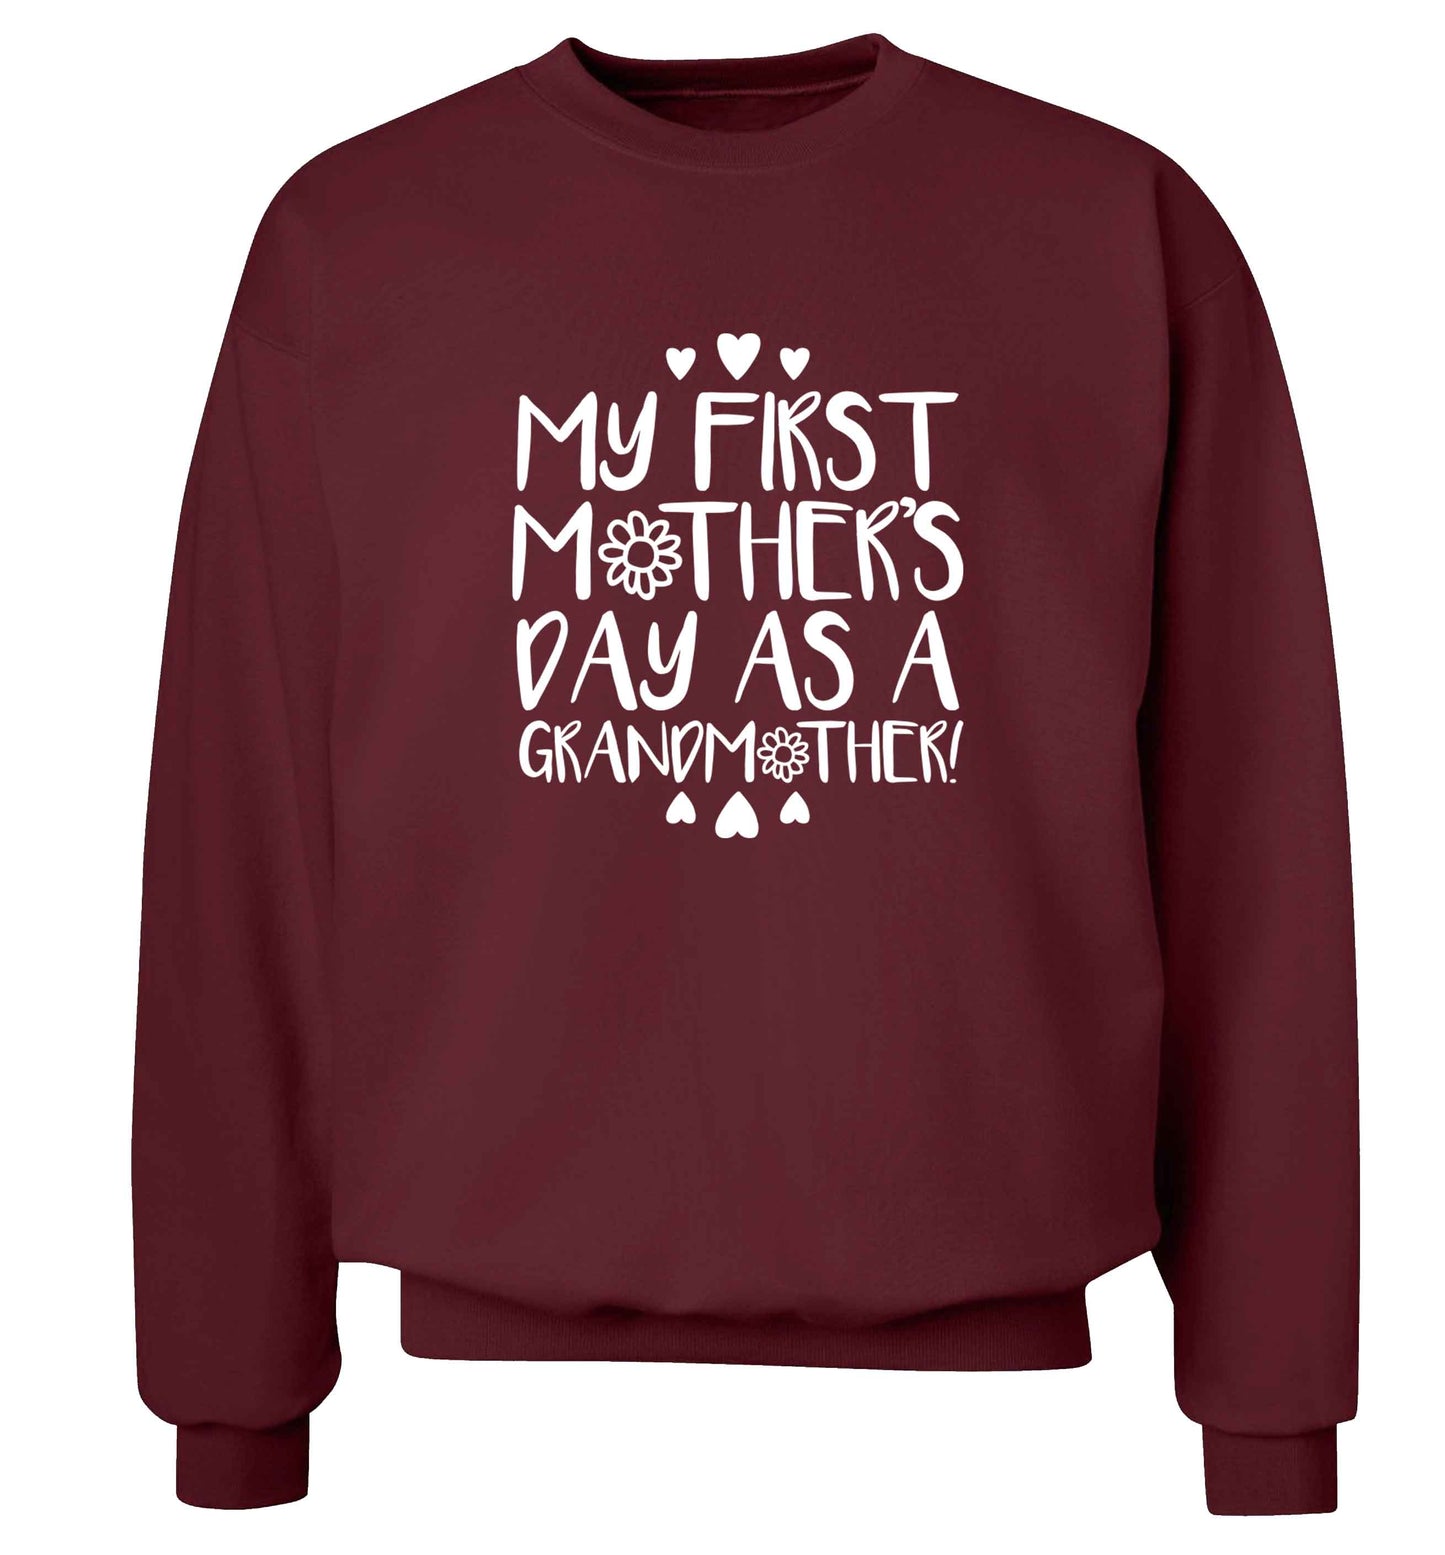 It's my first mother's day as a grandmother adult's unisex maroon sweater 2XL